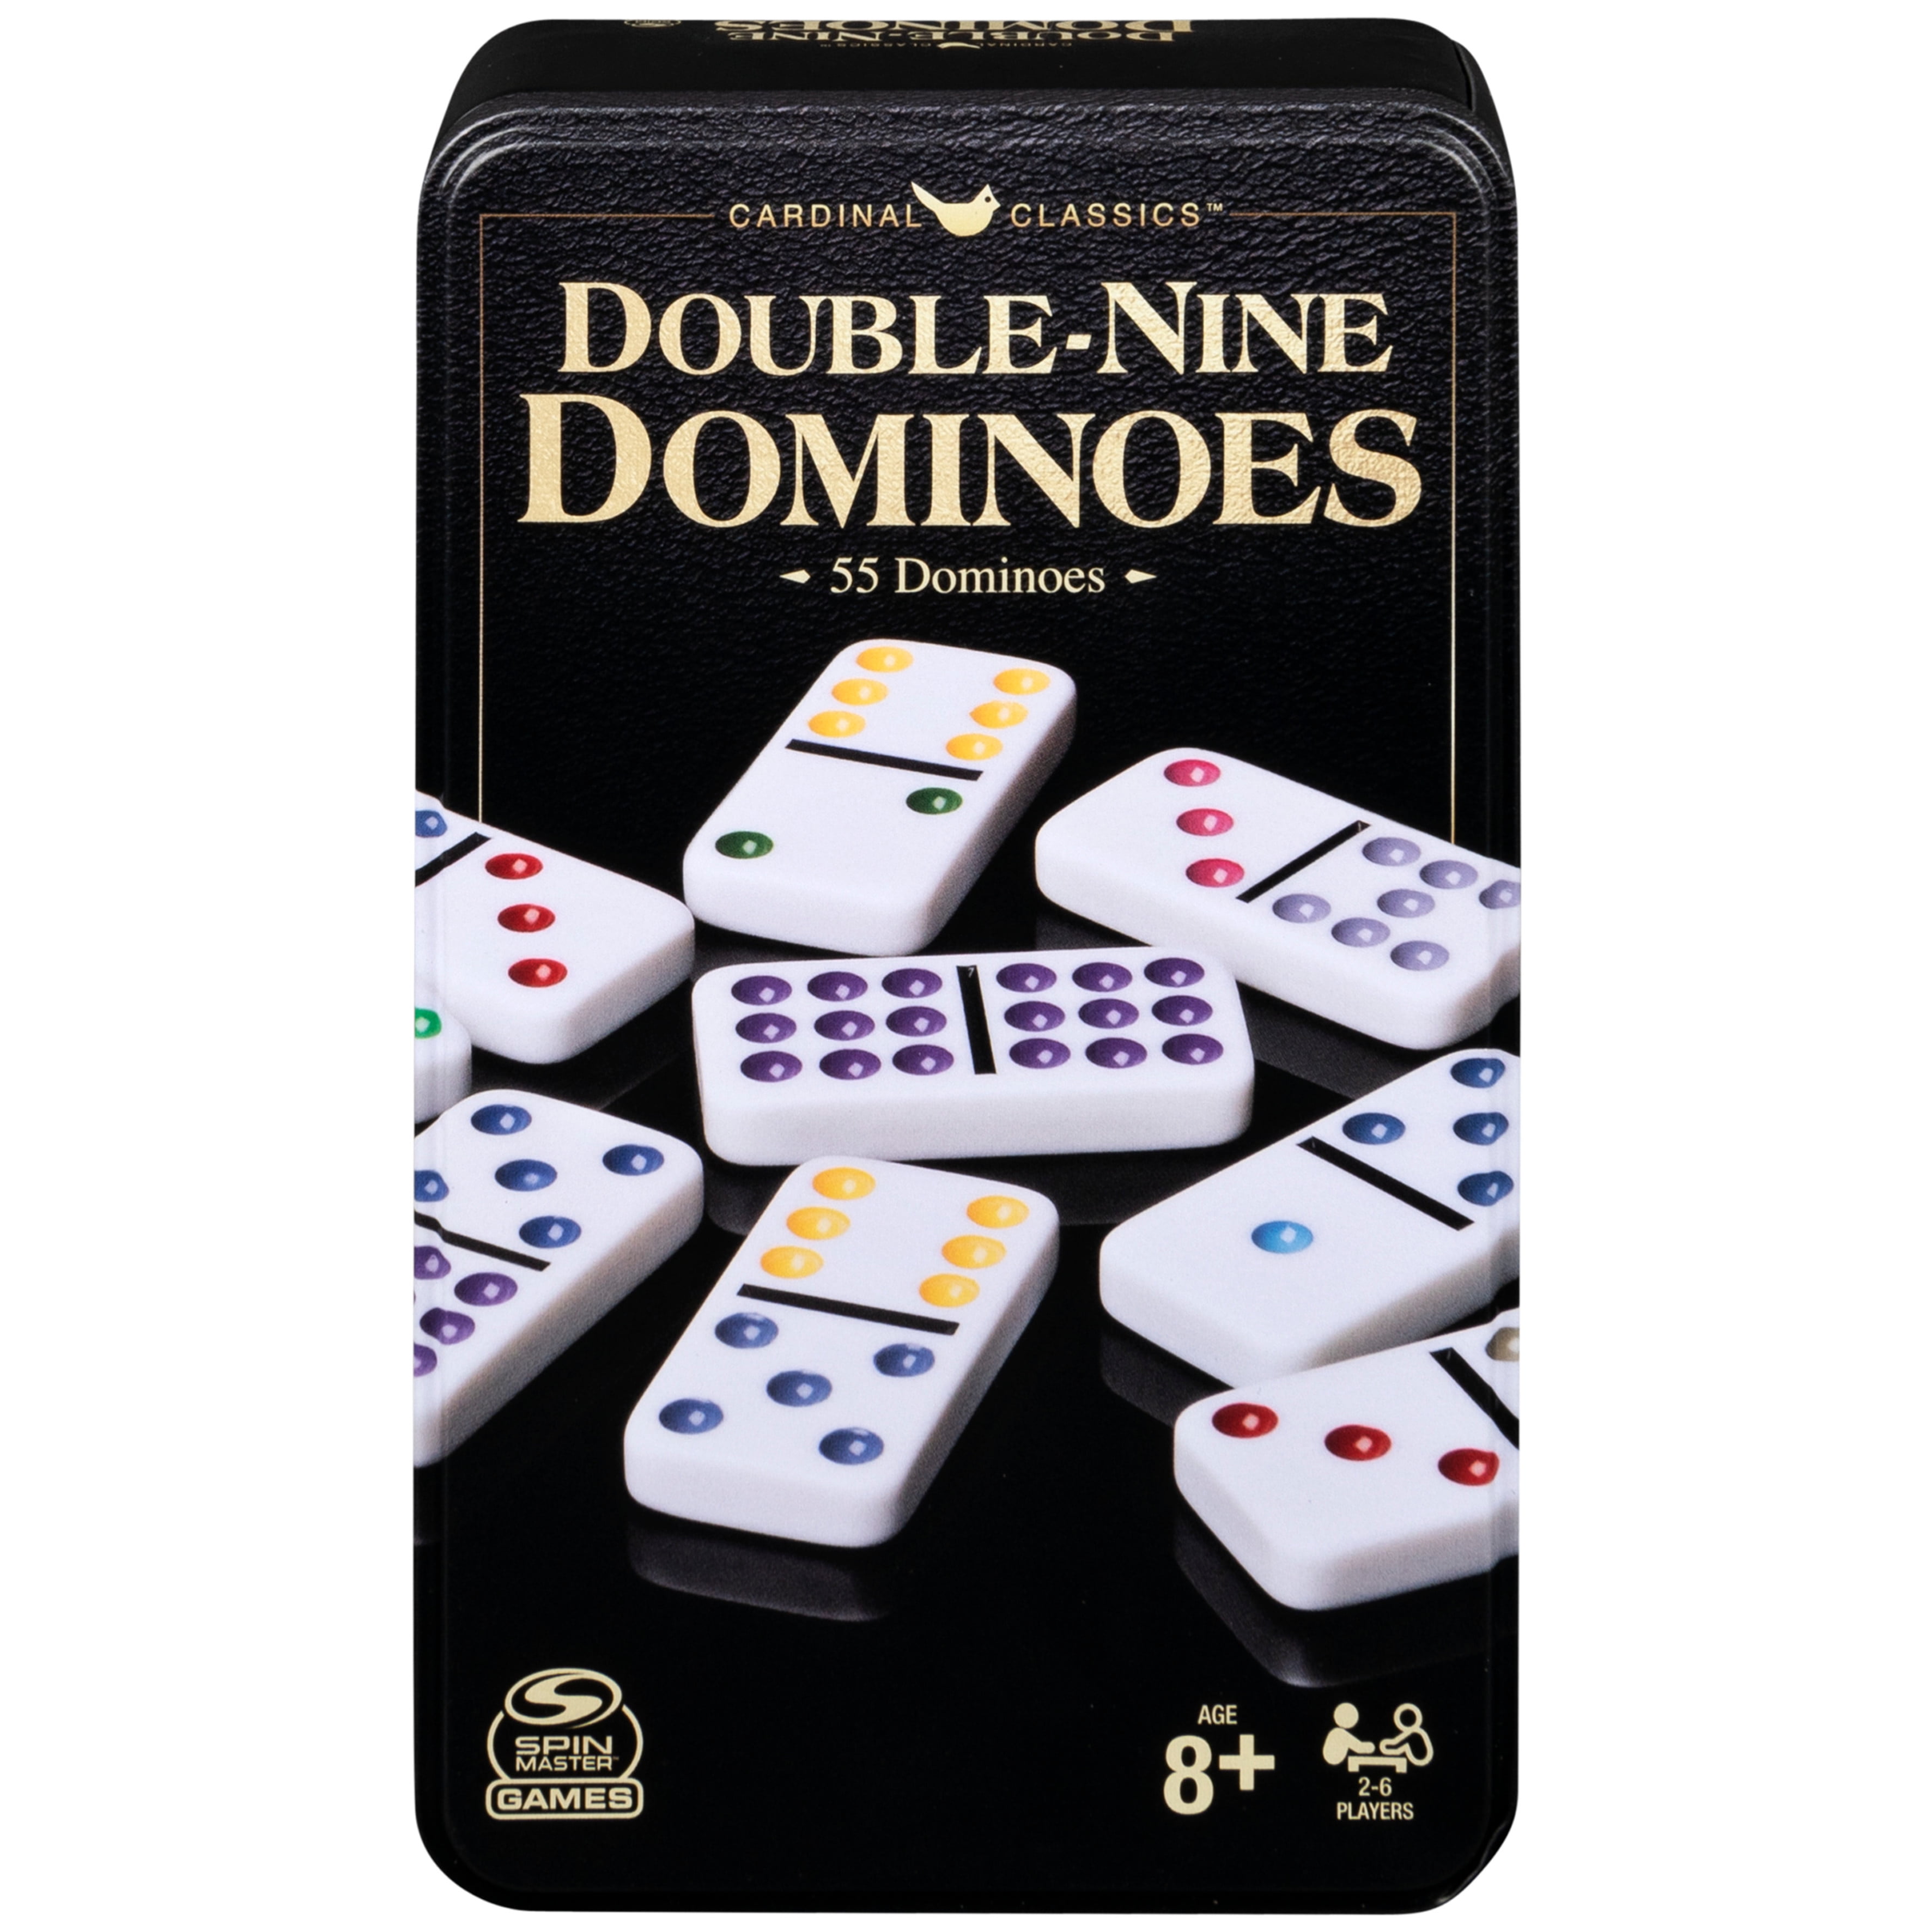 2 In 1 Double Six Dominoes & 2 Packs of Playing Cards Family Games Classic Games 